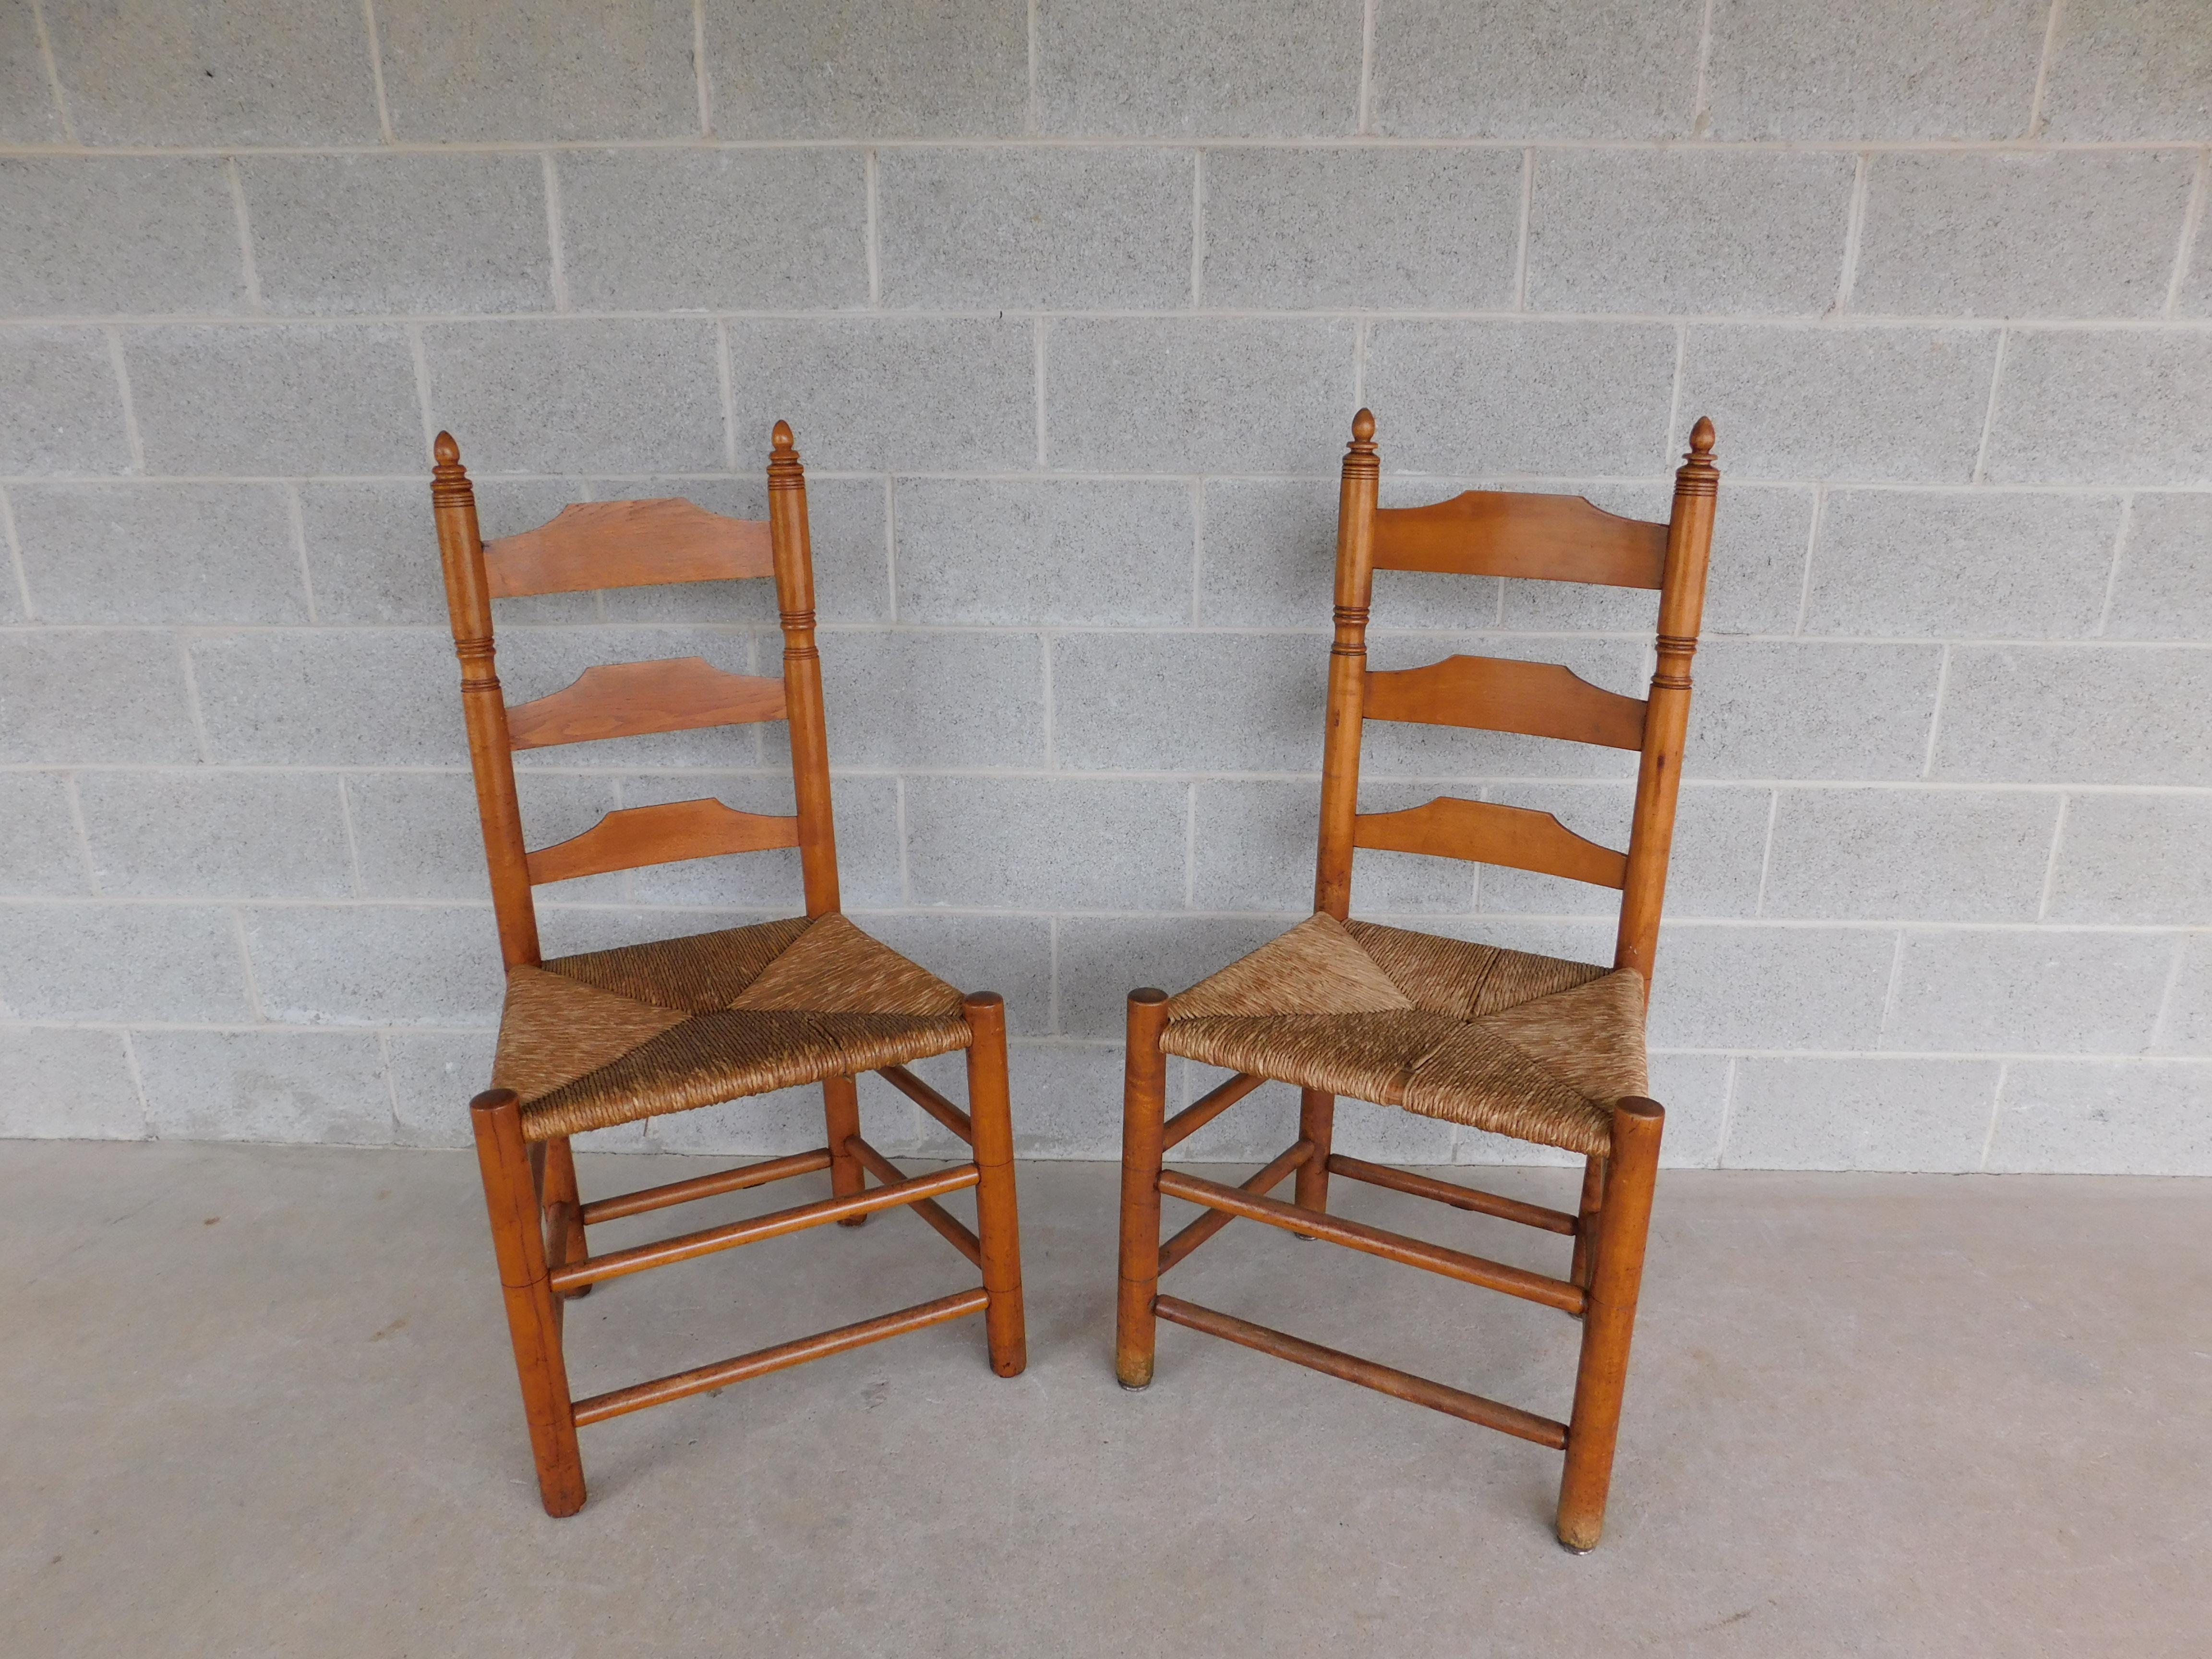 # 393 Pilgrim Ladder Back Side Chairs - a Pair

Hardwood Construction, Rush Bottom ( Maple with Rush Bottom )

Good Original Condition, Signed

Back Height 43